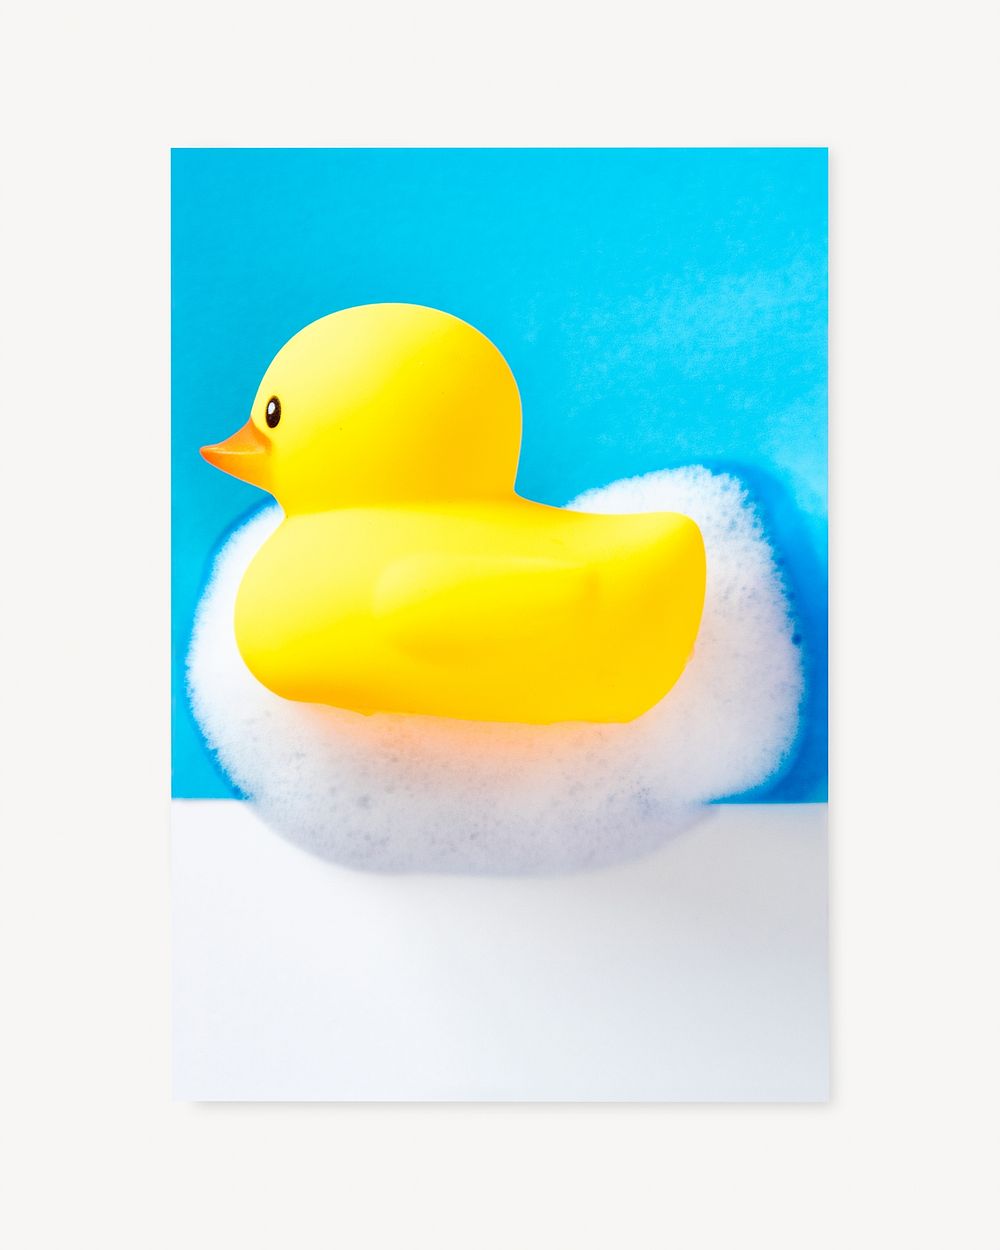 Bath rubber duck toy isolated image